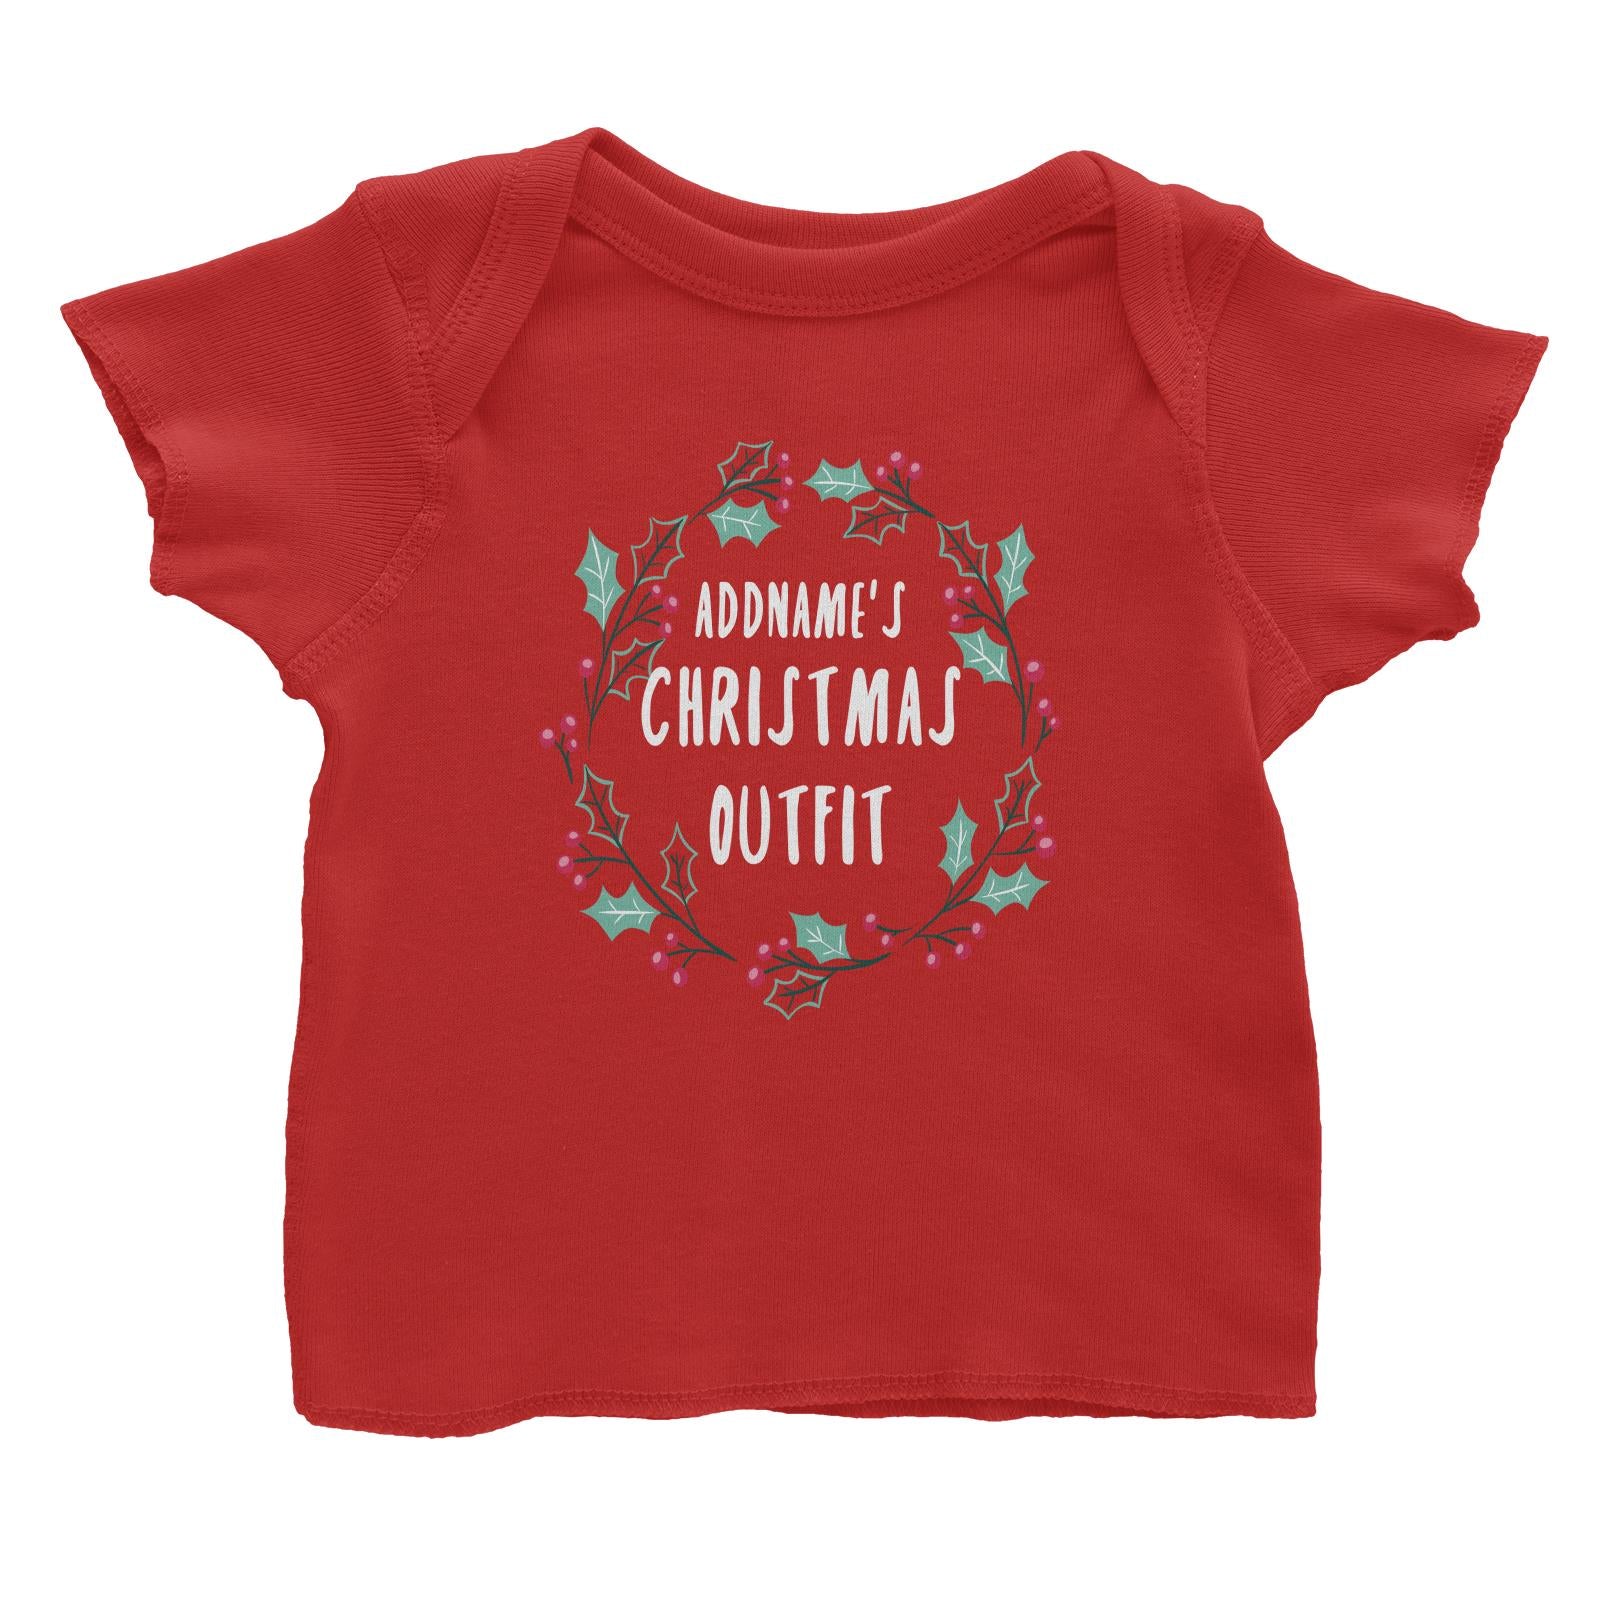 Holly Wreath Addname's Christmas Outfit Baby T-Shirt  Personalizable Designs Matching Family